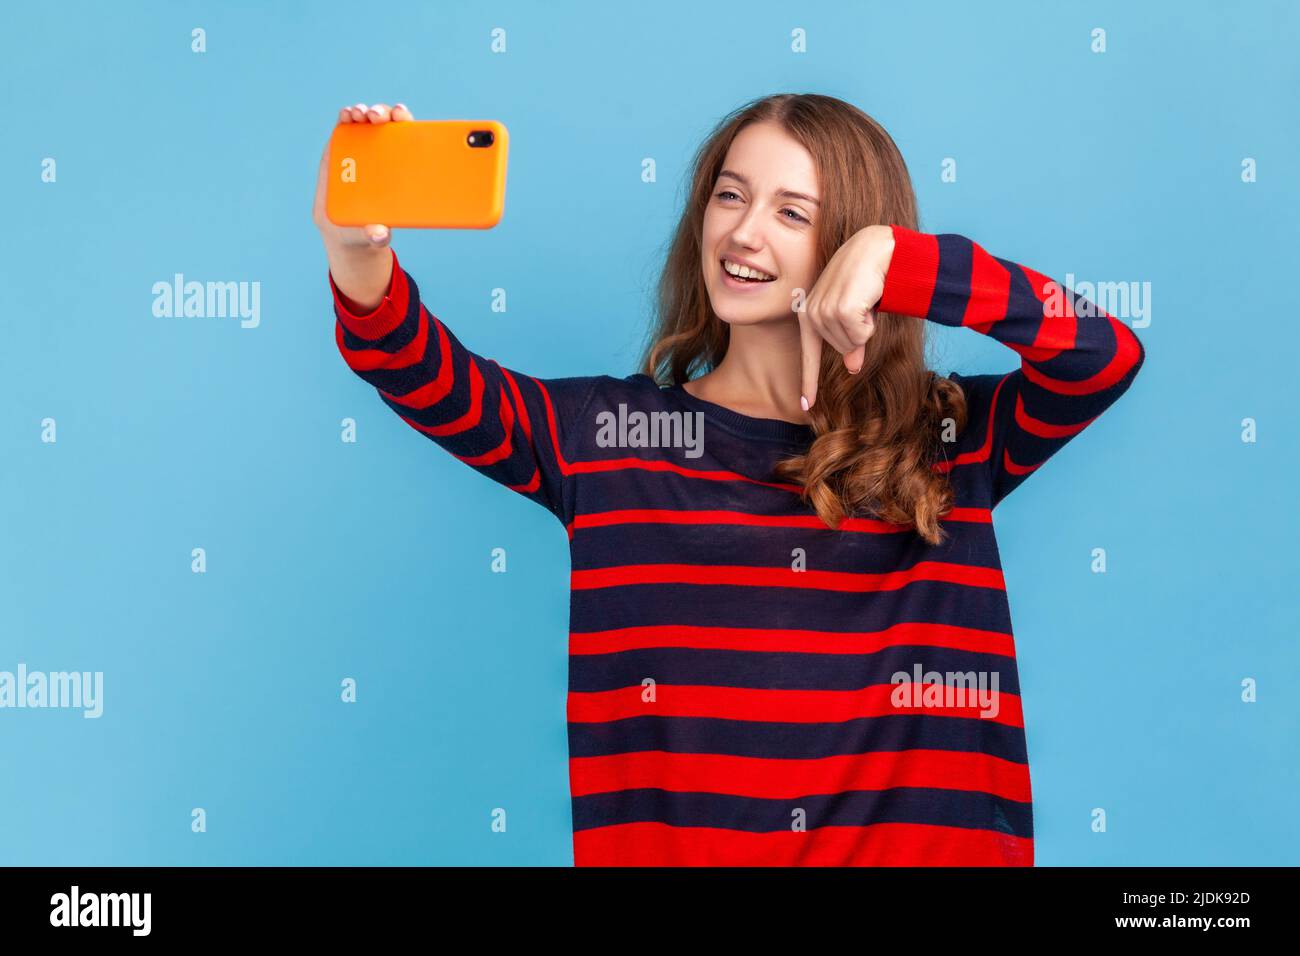 Attractive woman wearing striped casual style sweater, broadcasting livestream, pointing finger down, asking to subscribe for her blog. Indoor studio shot isolated on blue background. Stock Photo